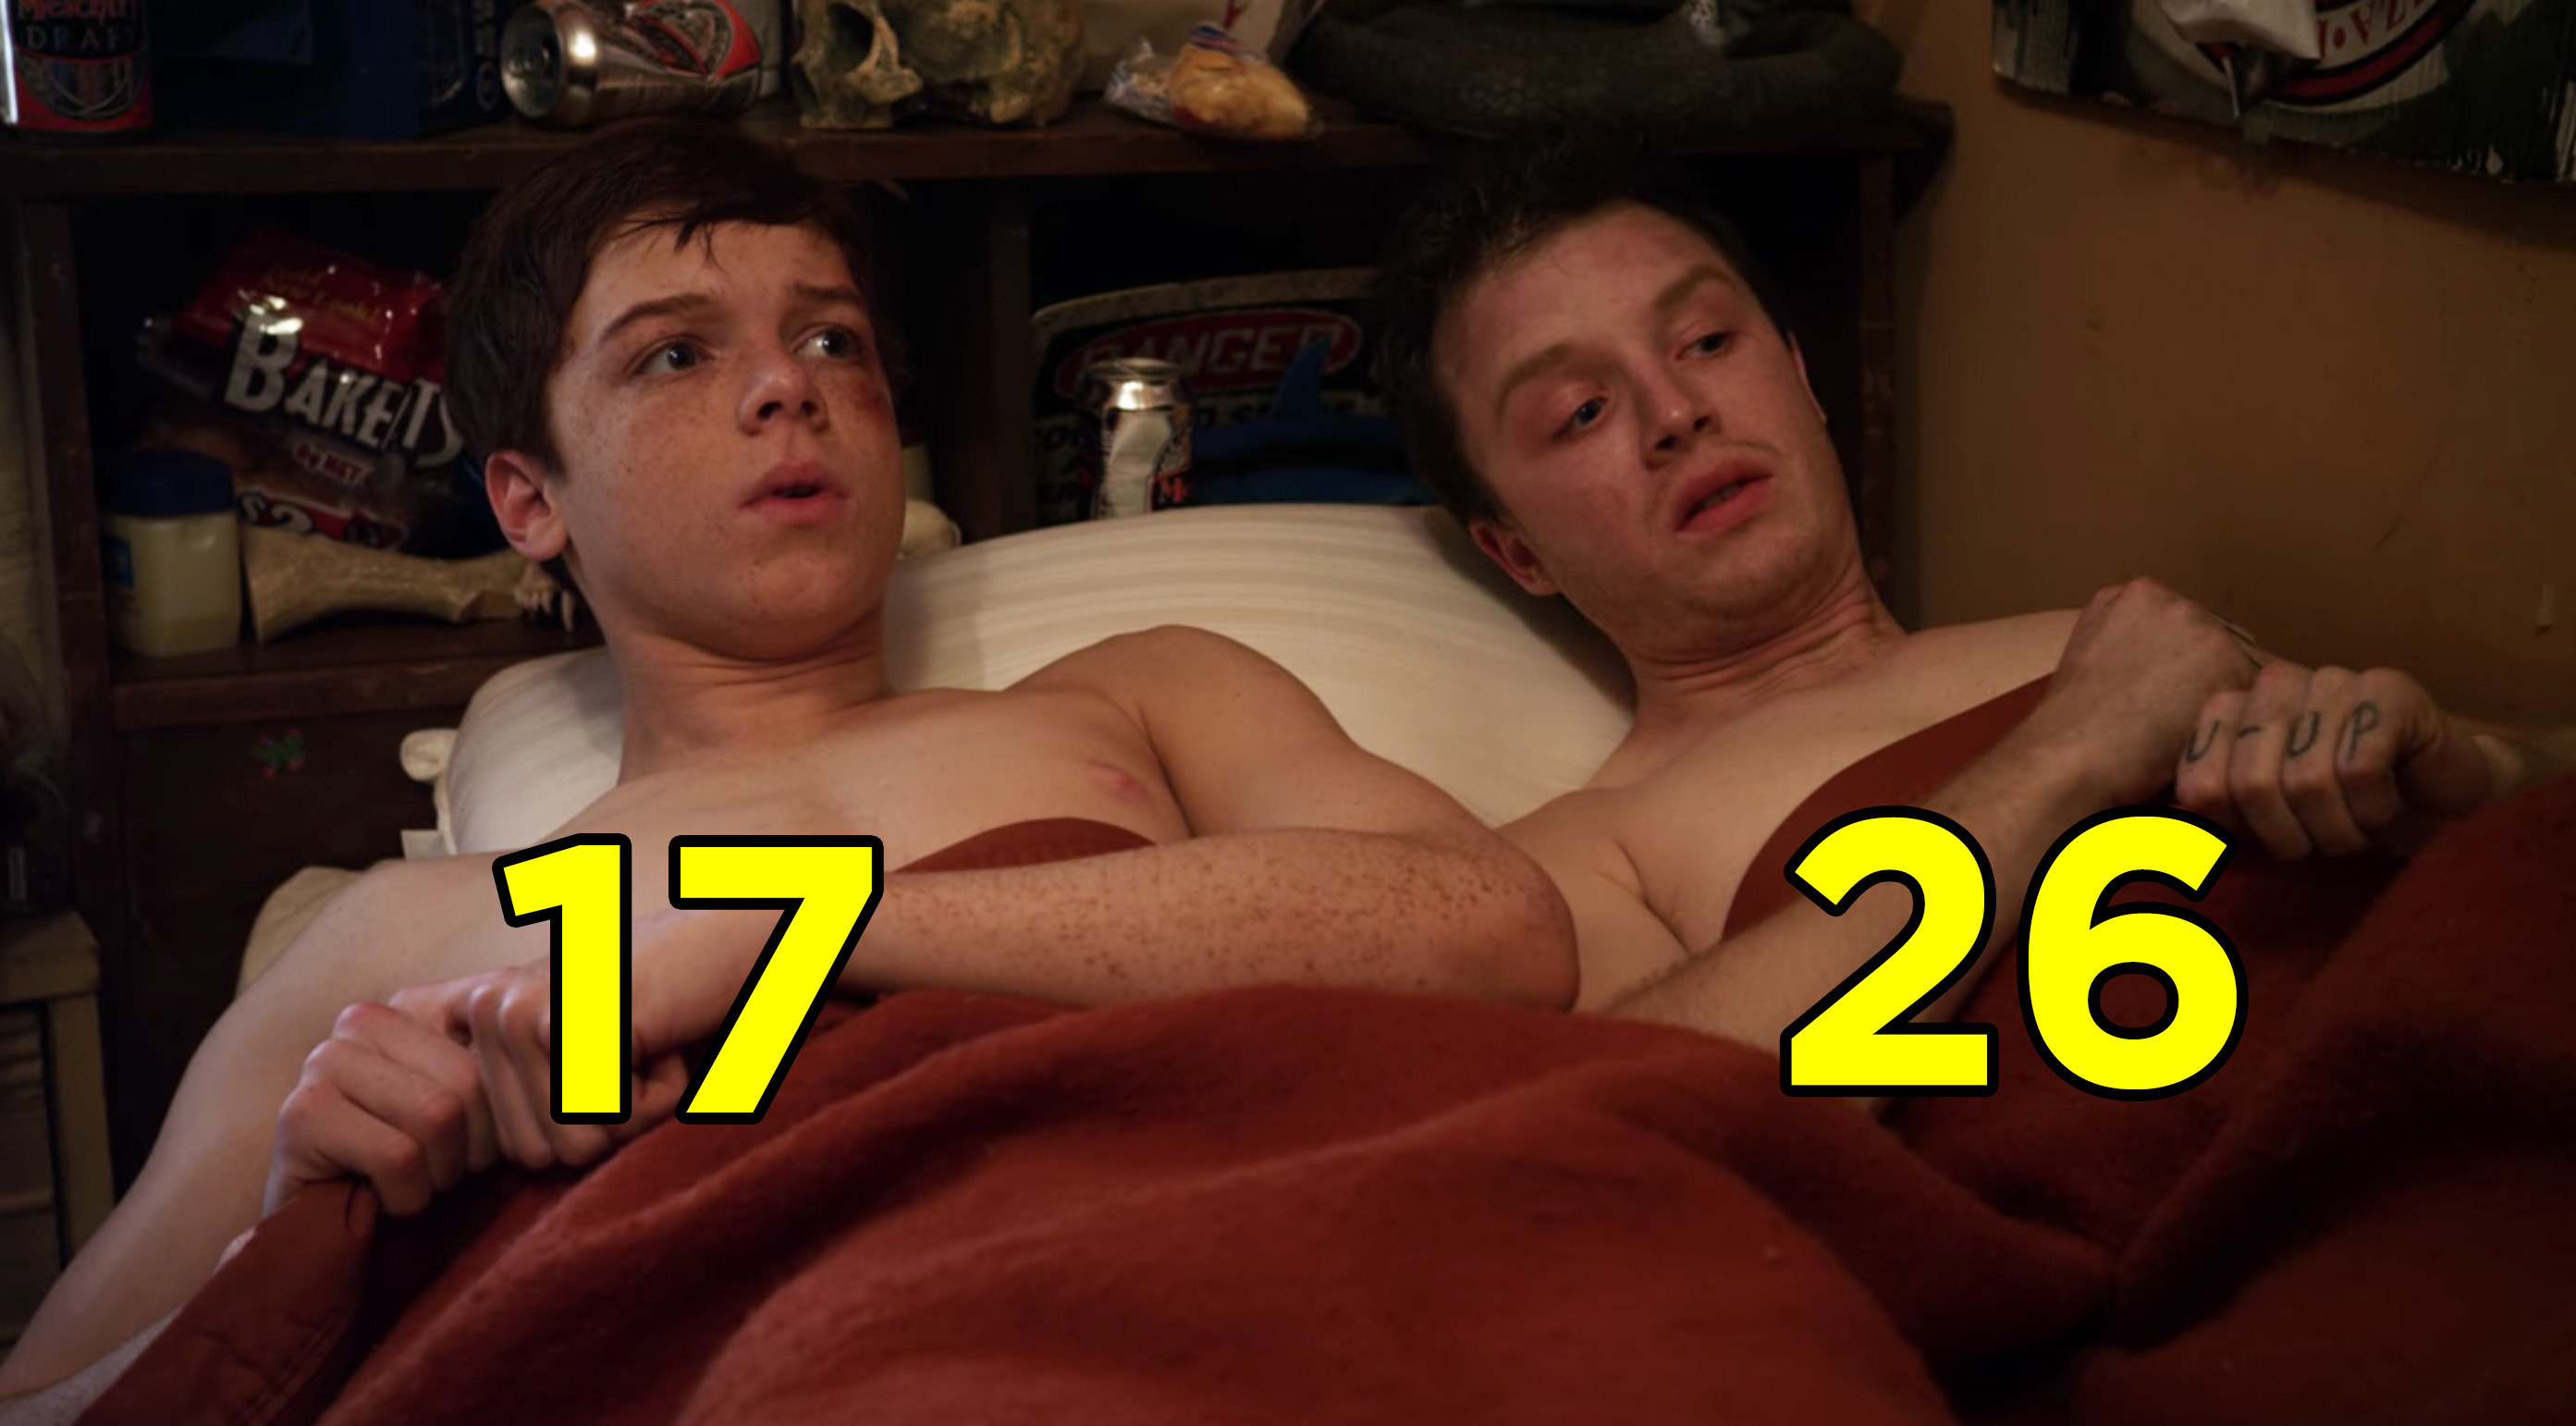 Cameron Monoghan and Noel Fisher in bed shirtless from a scene from &quot;Shameless&quot;